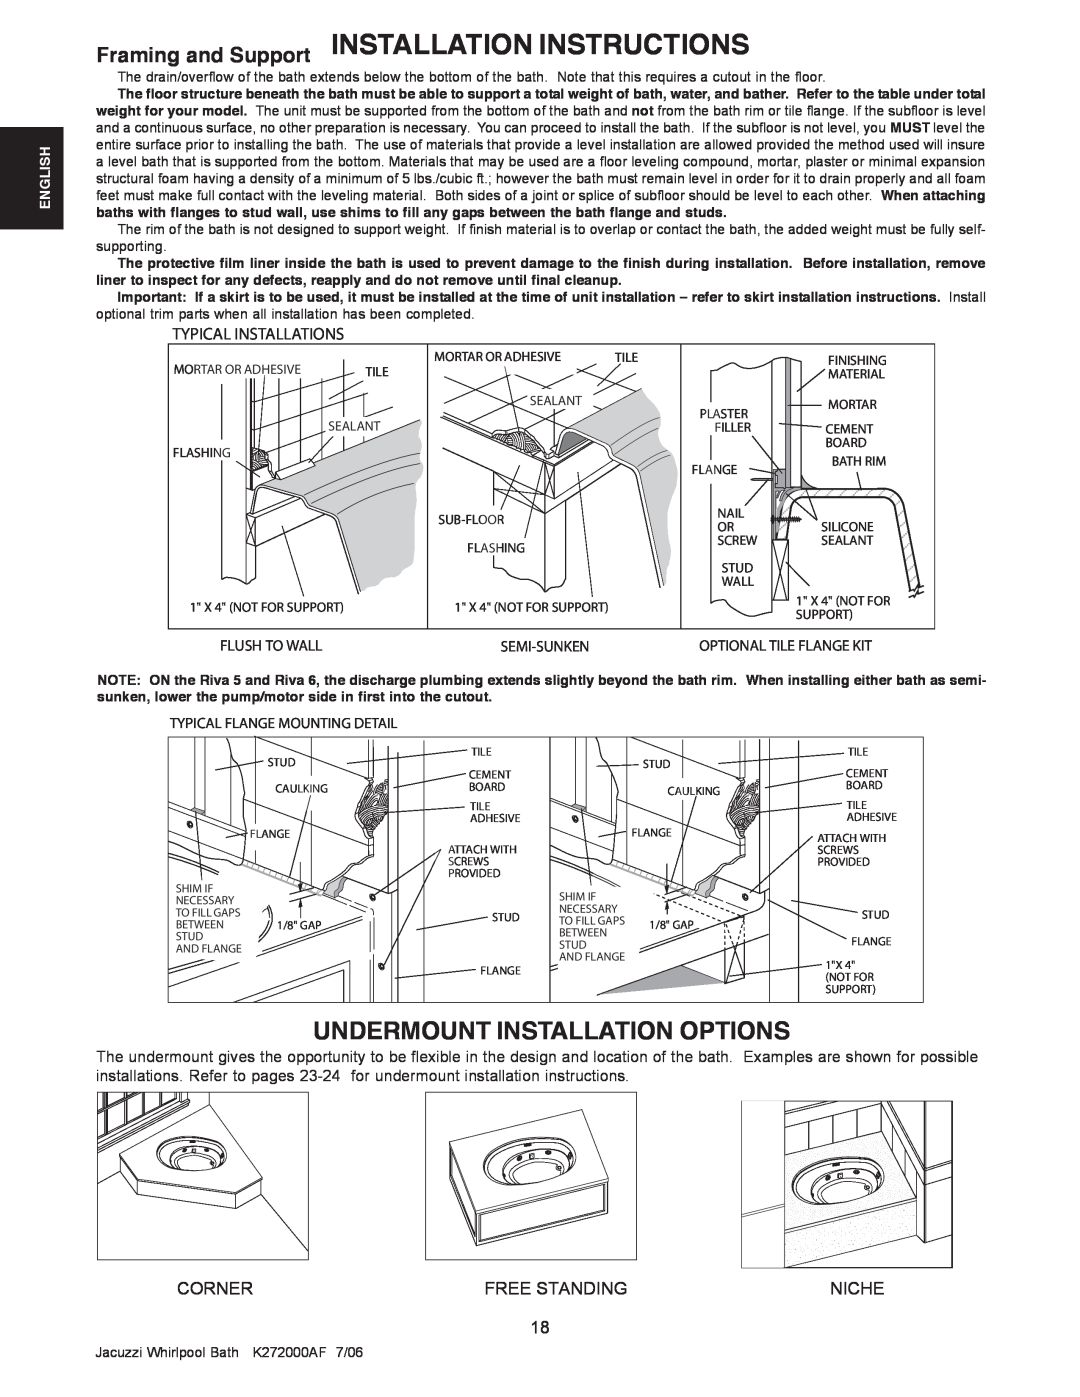 Jacuzzi K272000AF 7/06 manual Framing and Support INSTALLATION INSTRUCTIONS, Undermount Installation Options, Flush To Wall 